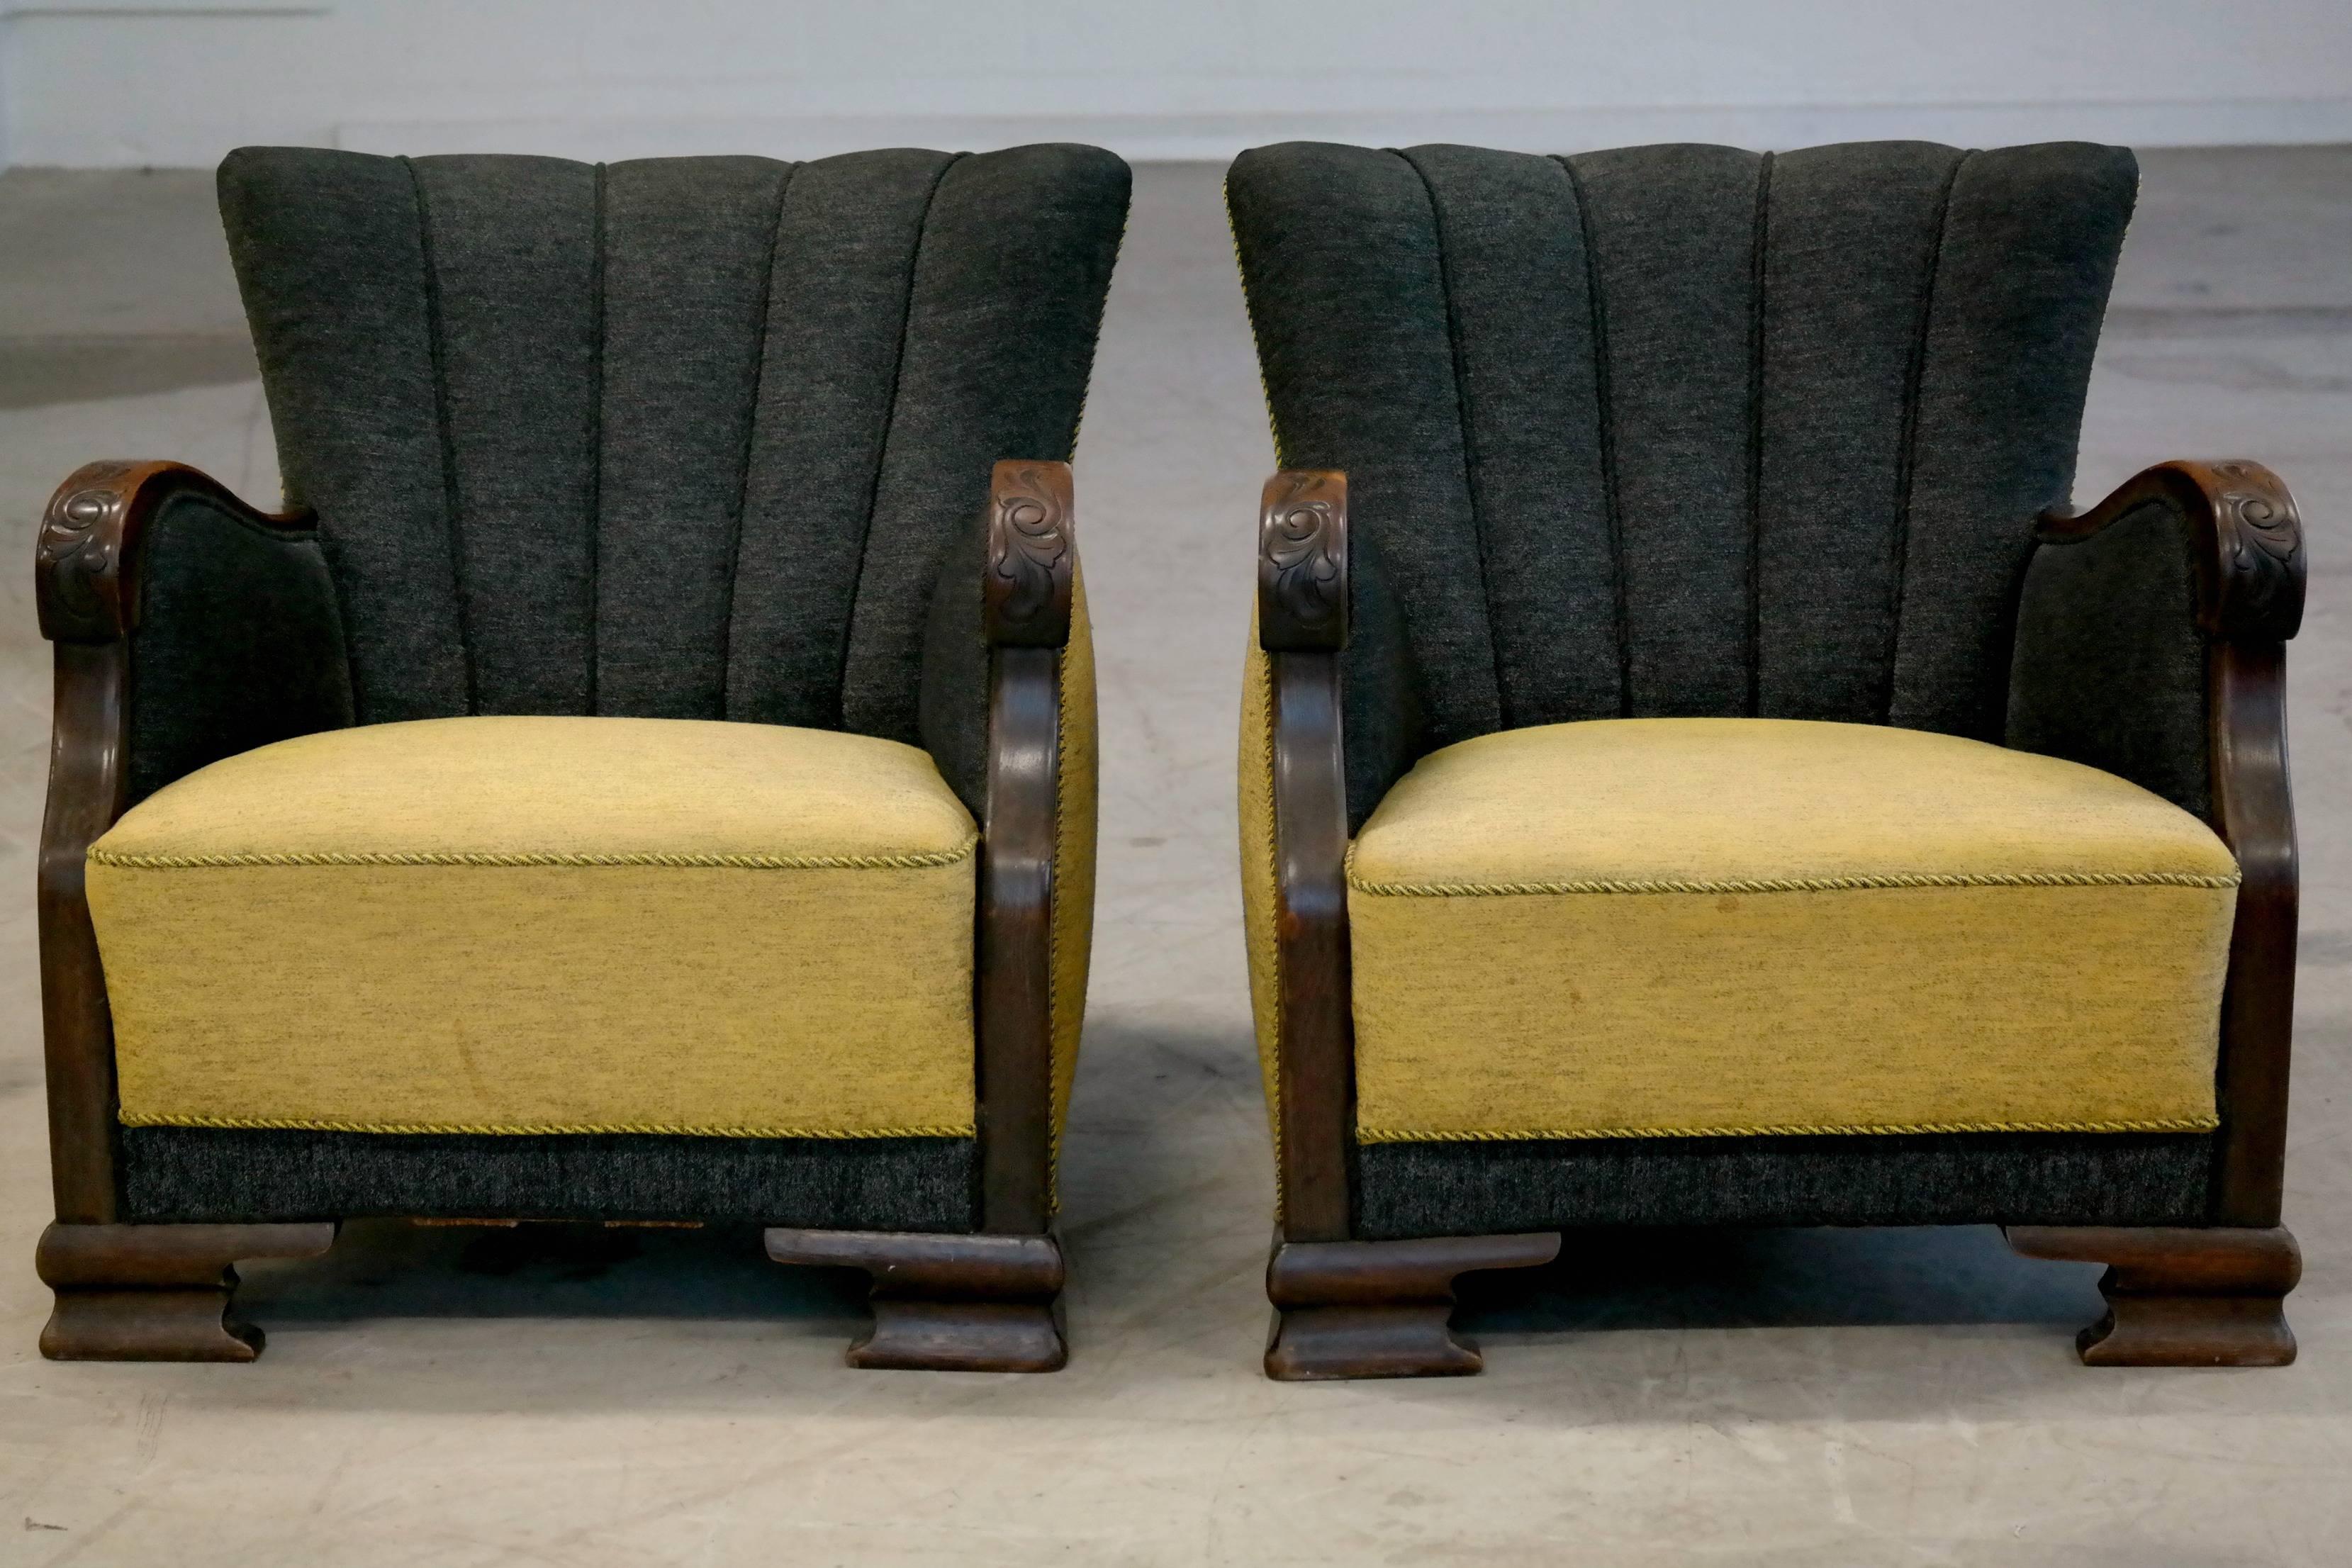 Beautiful Danish made early Mid-Century club chairs. Beautifully hand-carved armrests in mahogany. Still has original fabric and all its old-world charm.